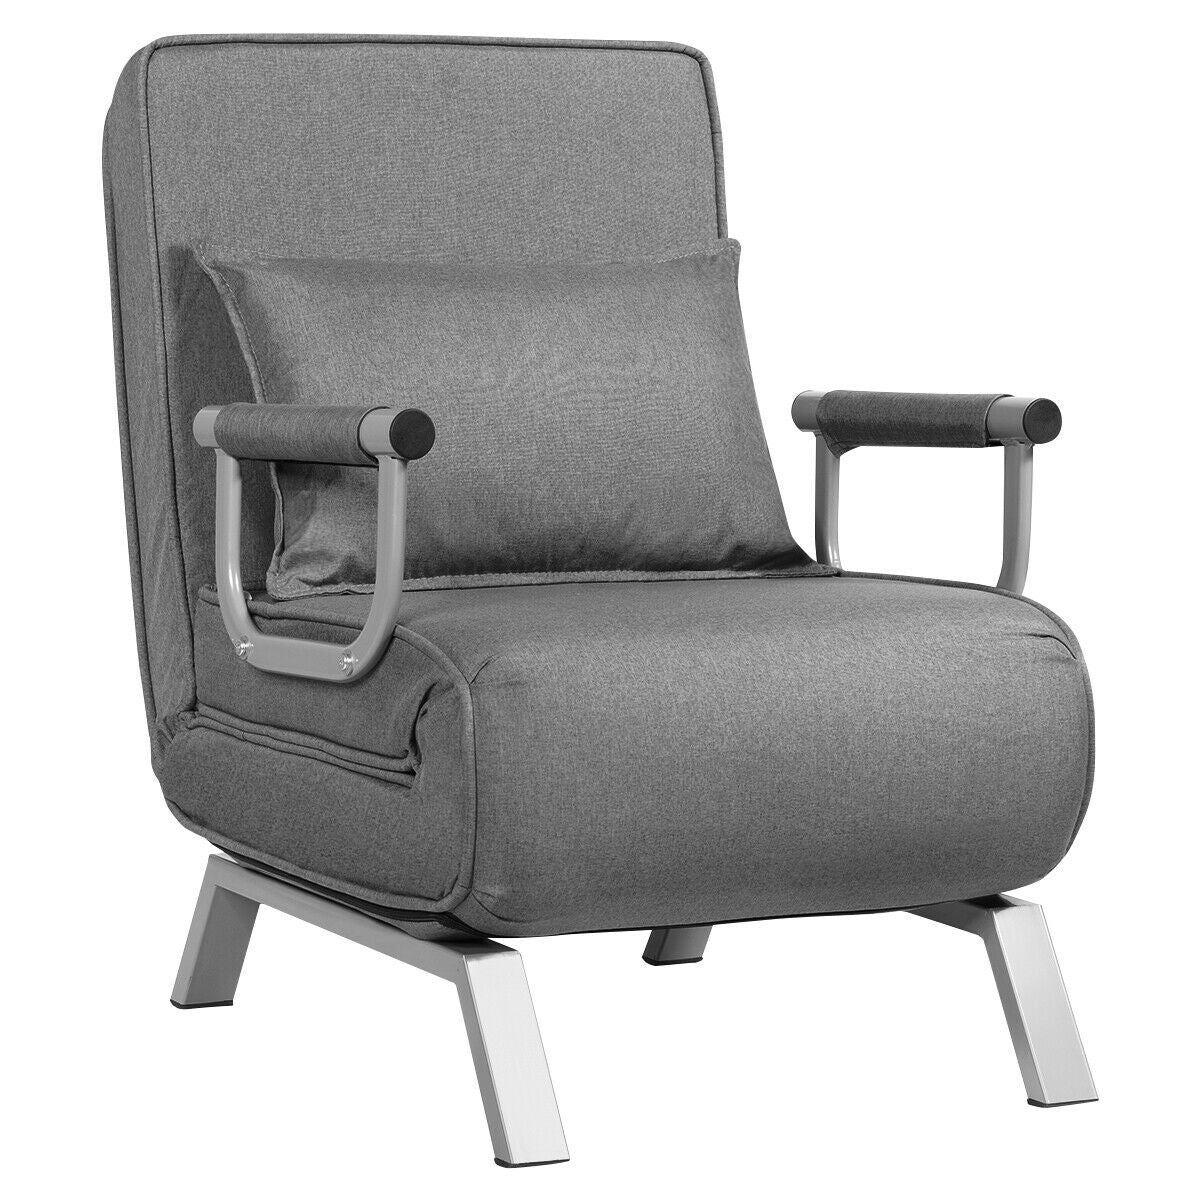 Folding 6 Position Convertible Sleeper Bed Armchair Lounge Couch with Pillow, Gray - Gallery Canada